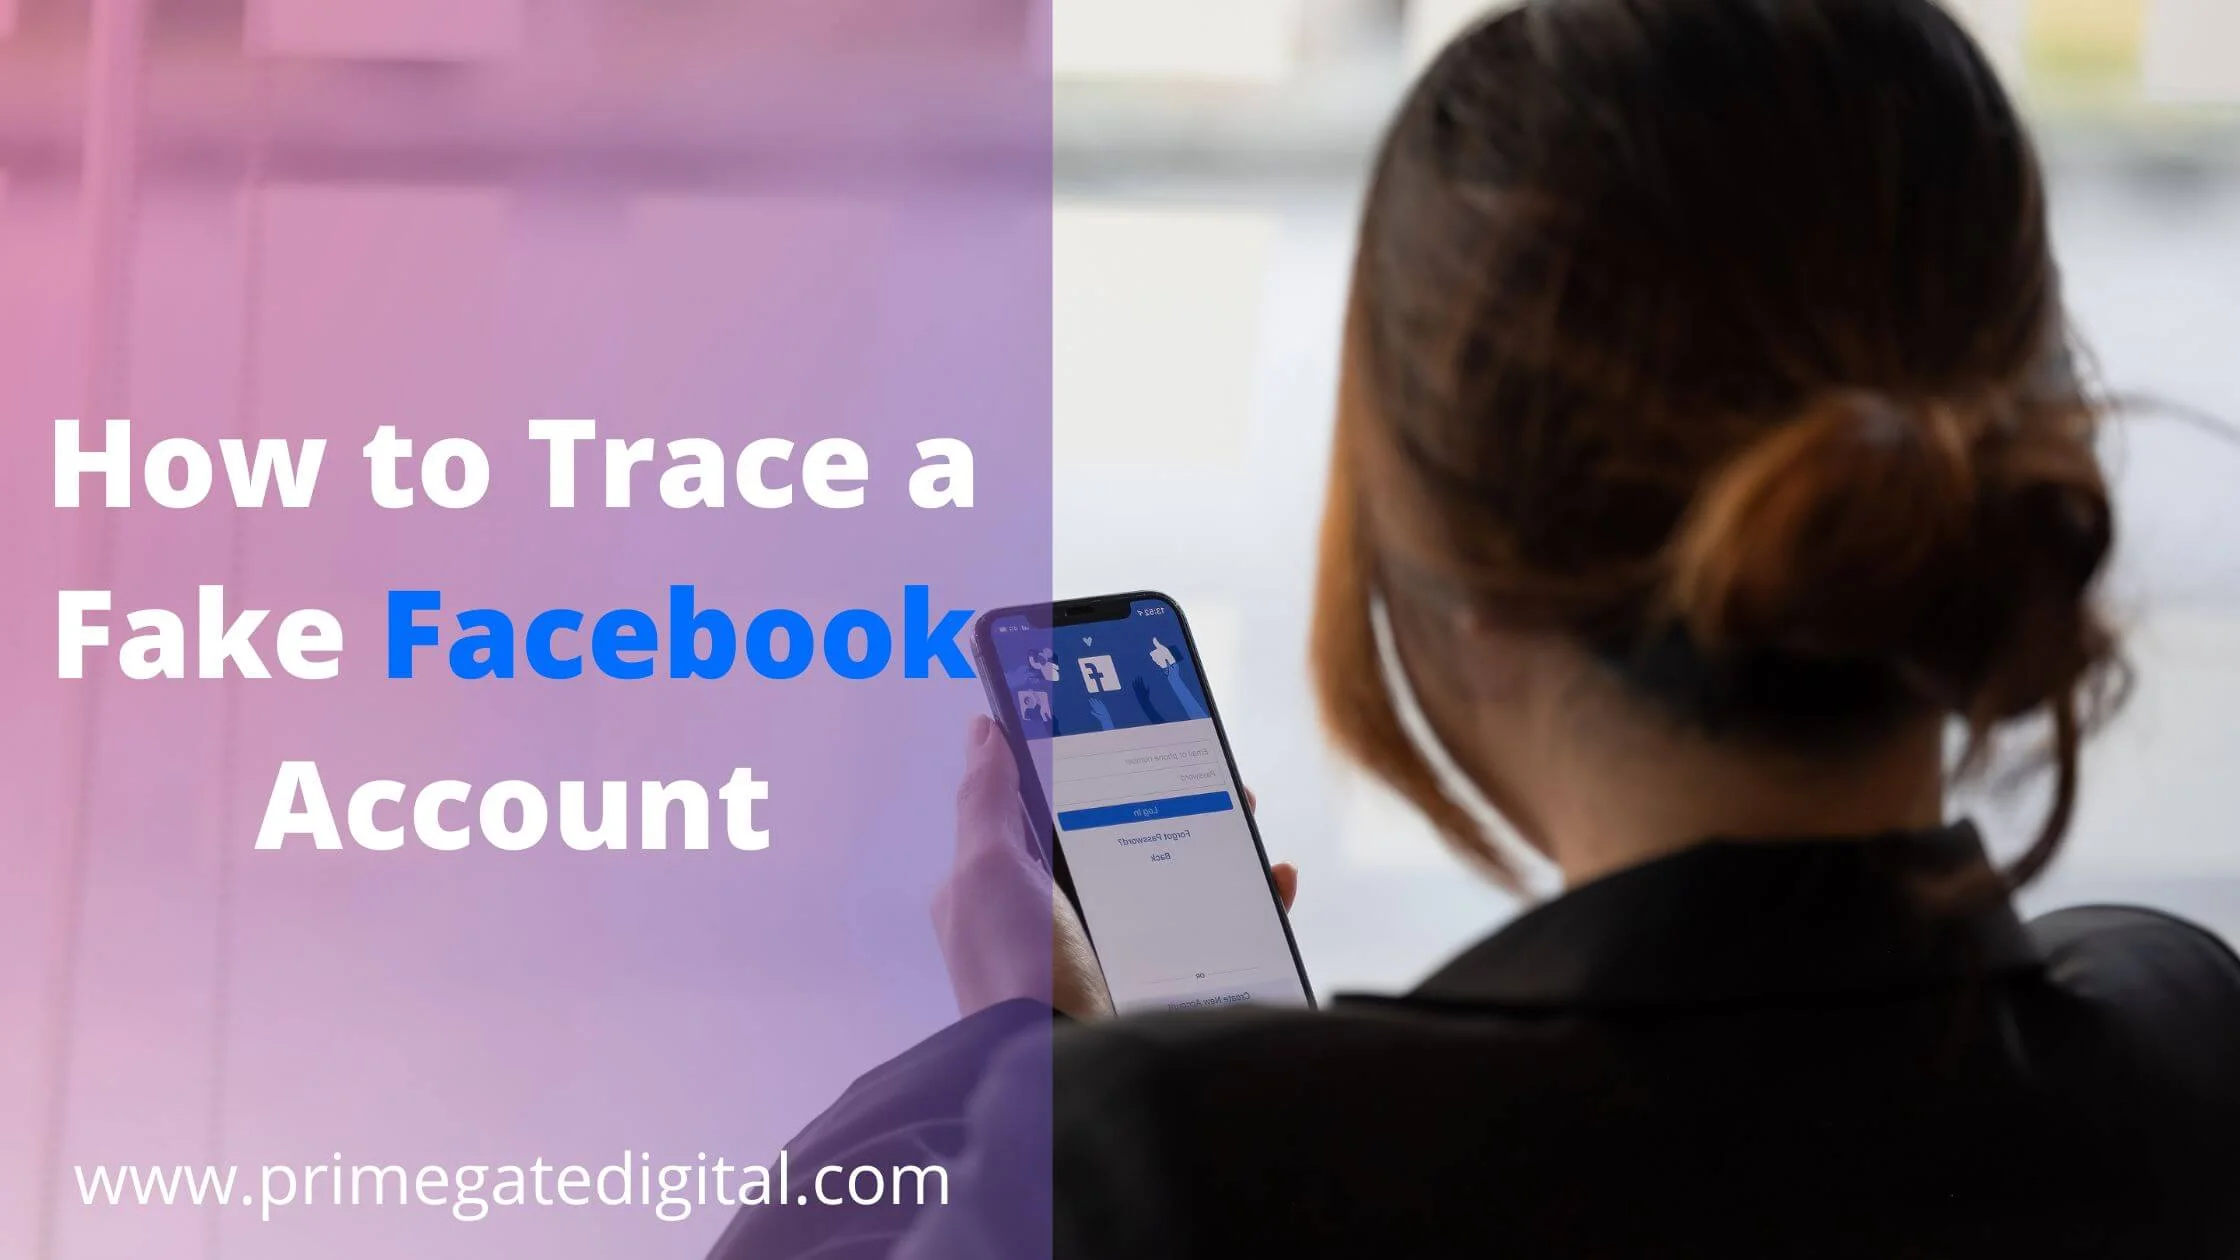 Trace a Fake Facebook Account